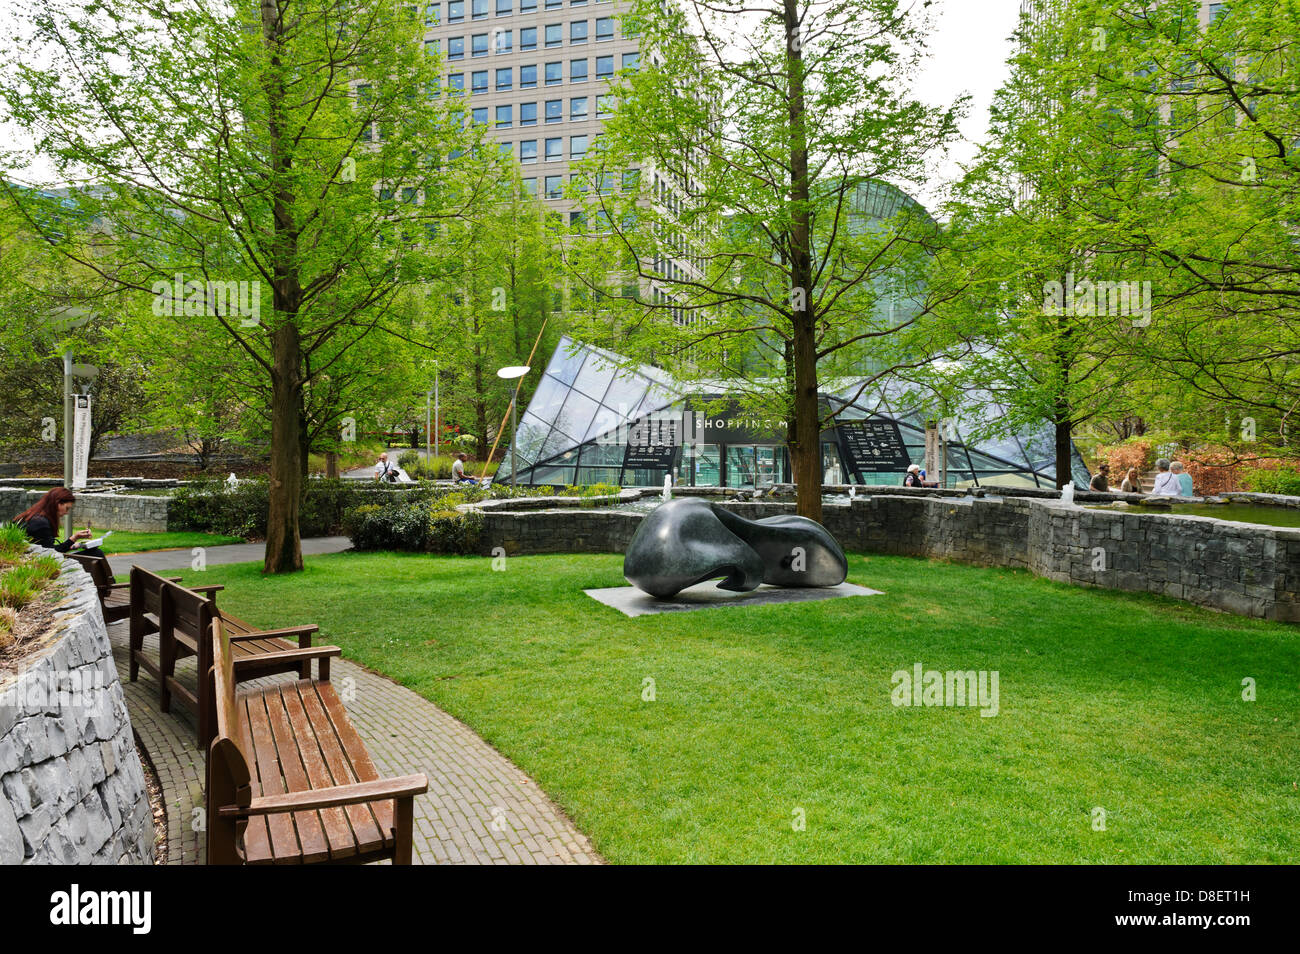 Sculpture in Jubilee Park, Canary Wharf, London, England, United Kingdom. Stock Photo